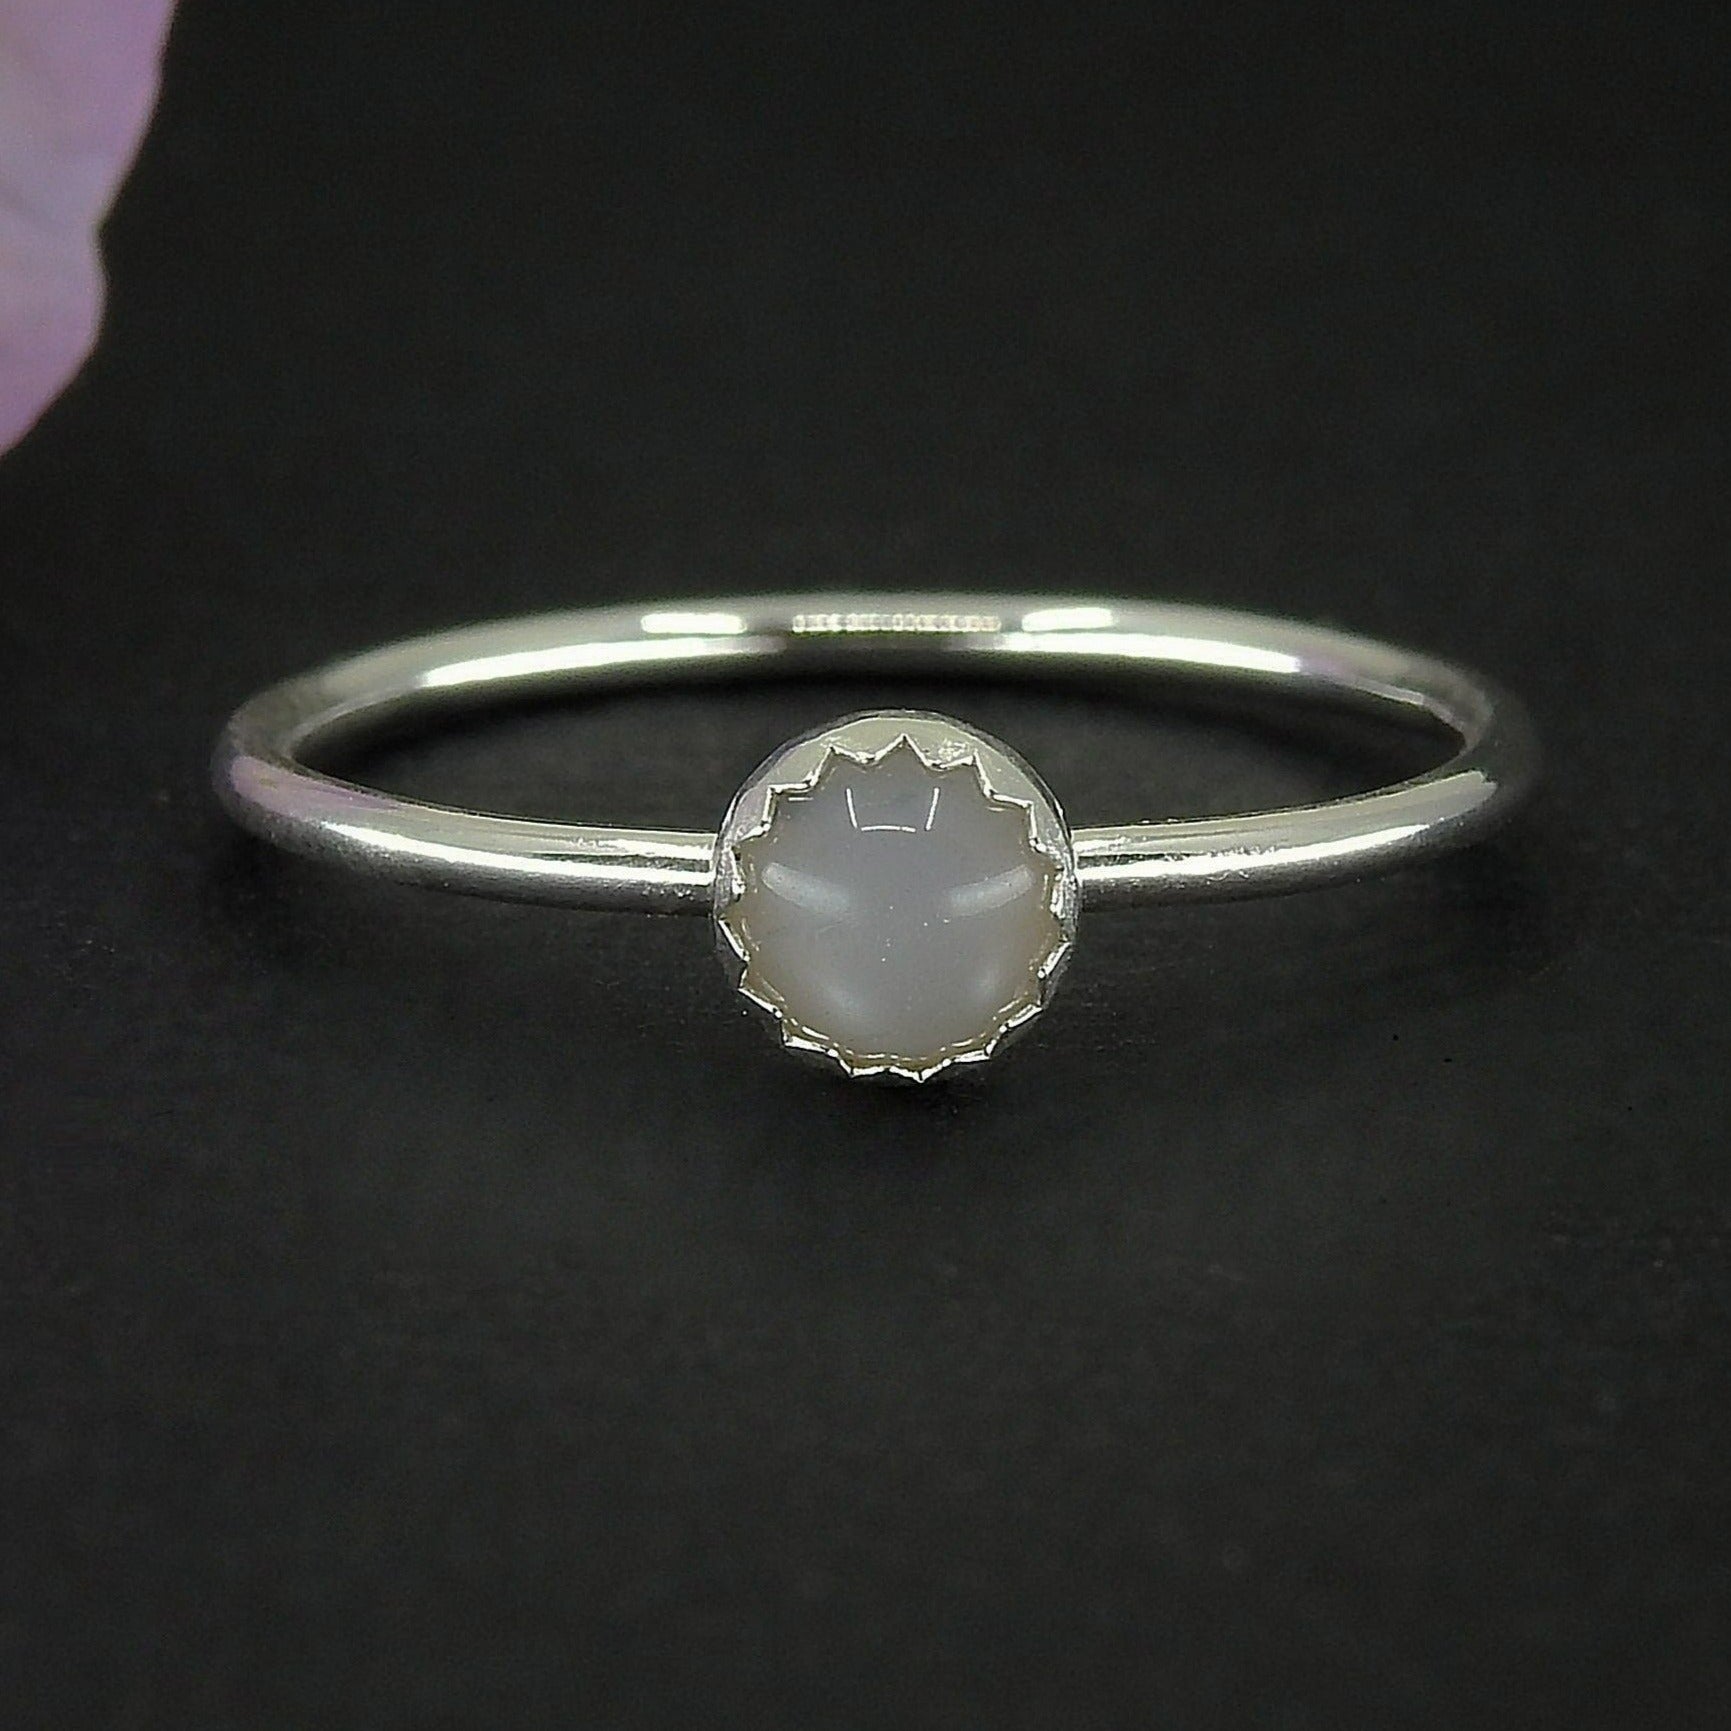 Grey Moonstone Ring - Made to Order 